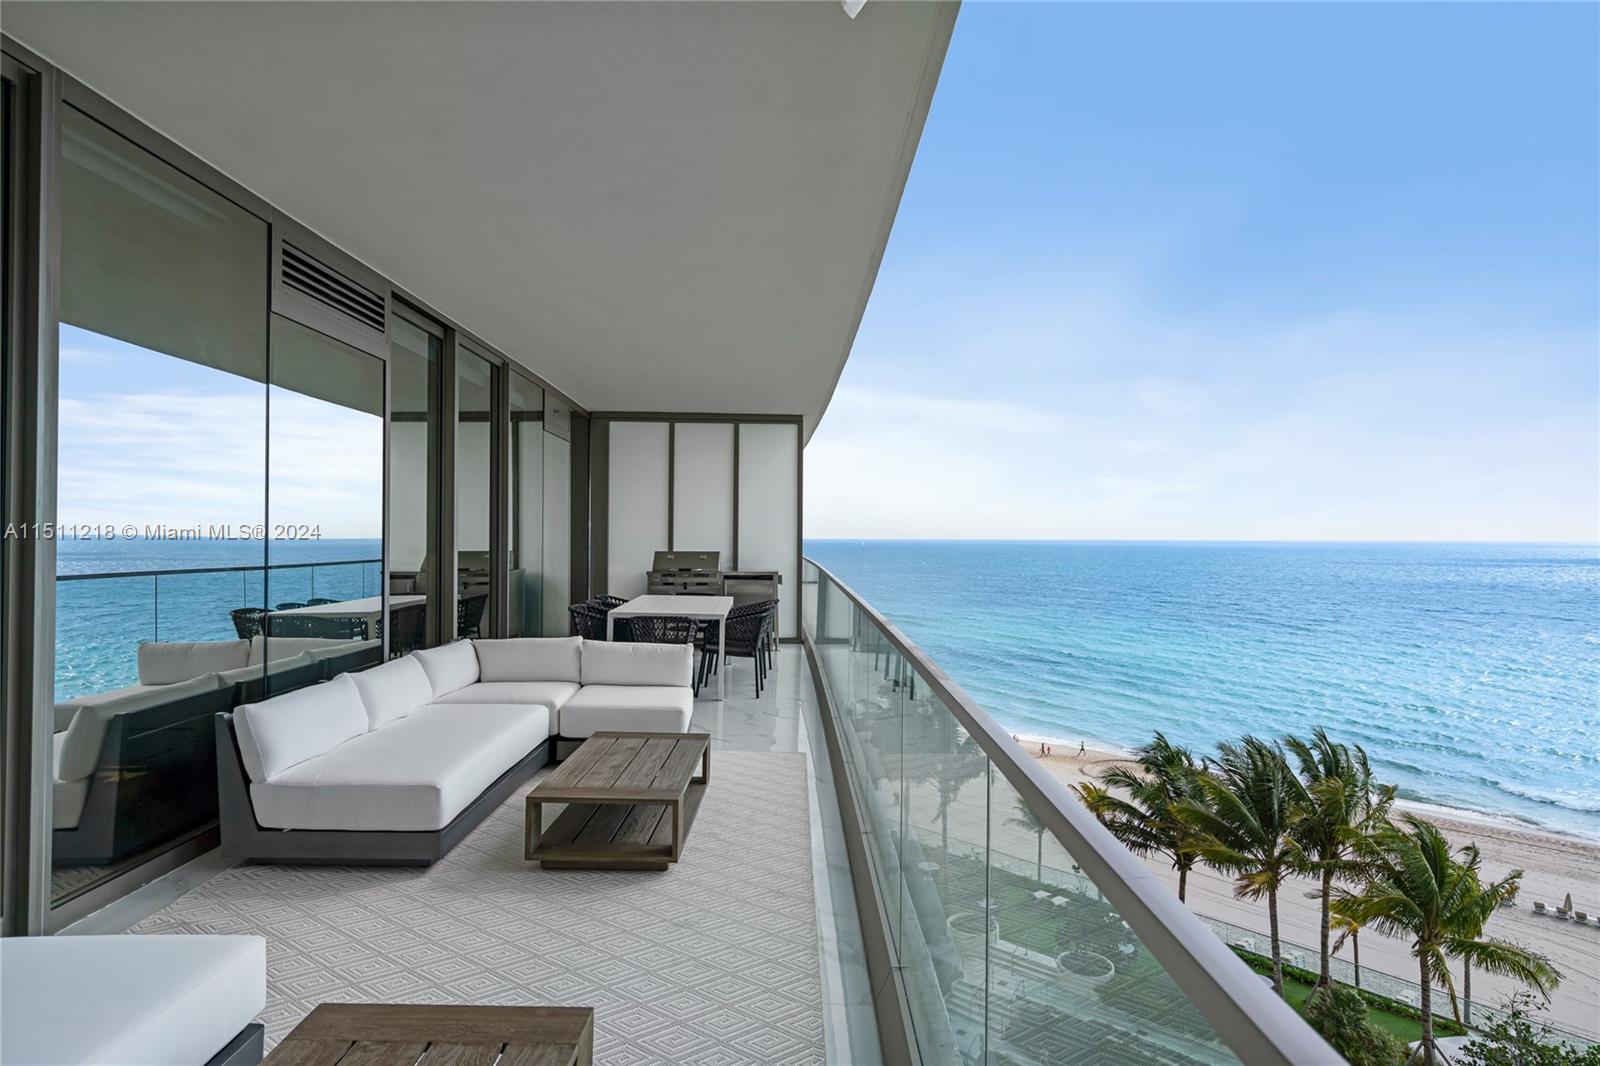 Experience luxury living at its finest in this fully furnished 4-bedroom oceanfront unit at Residences by Armani/Casa! Revel in state-of-the-art kitchen, breathtaking ocean & bay vistas, Giorgio Armani's elegant design, and top-notch amenities, including a private restaurant, spa, pool, fitness center, and direct beach access. Your dream oceanfront retreat awaits!"